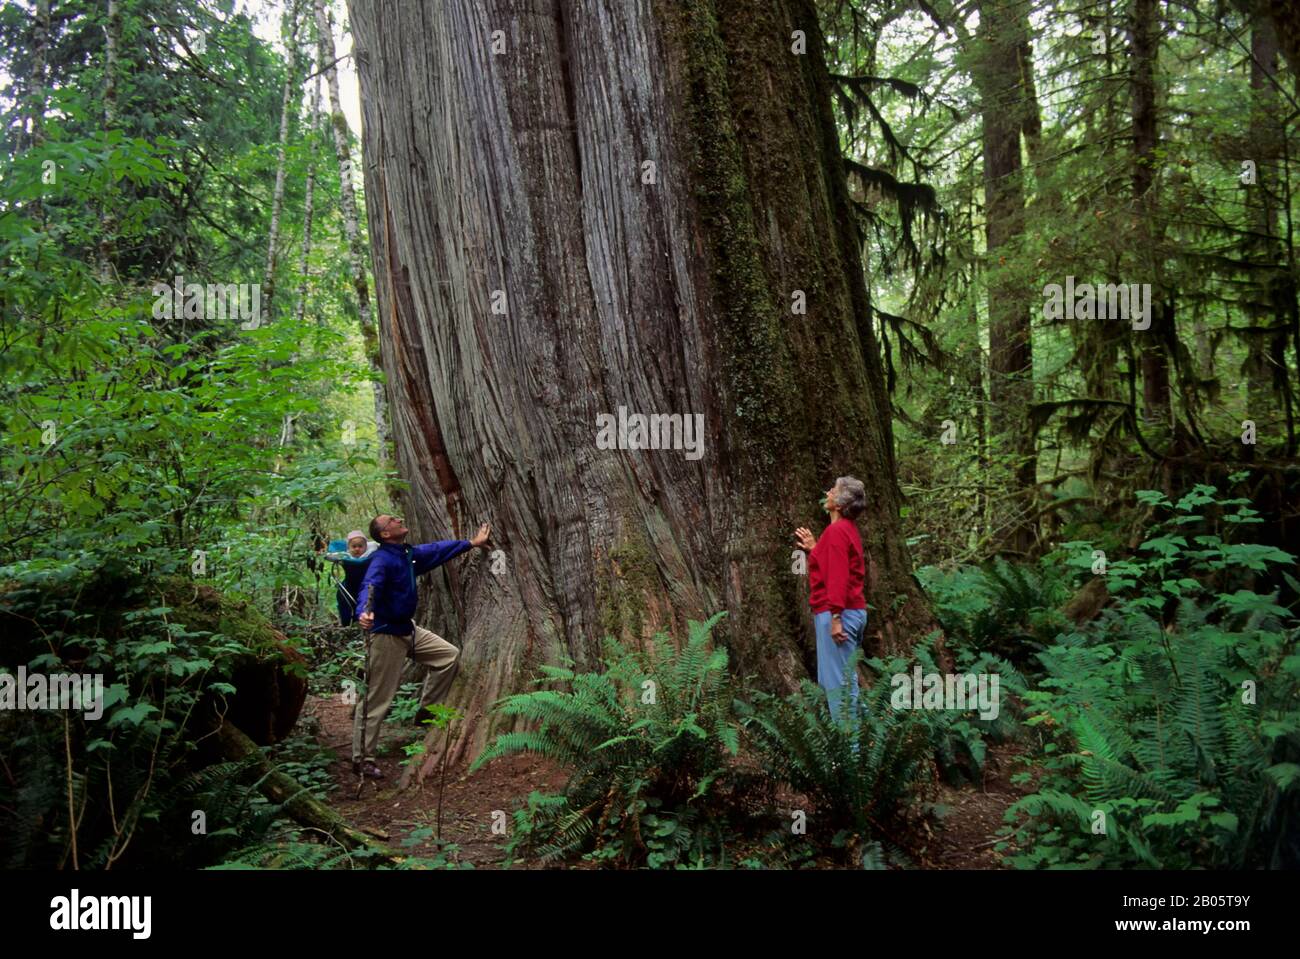 USA, WASHINGTON, SNOHOMISH COUNTY, CASCADE MOUNTAINS, NEAR DARRINGTON, PERSONS STANDING IN OLD GROWTH FOREST NEXT TO HUGE TREE Stock Photo